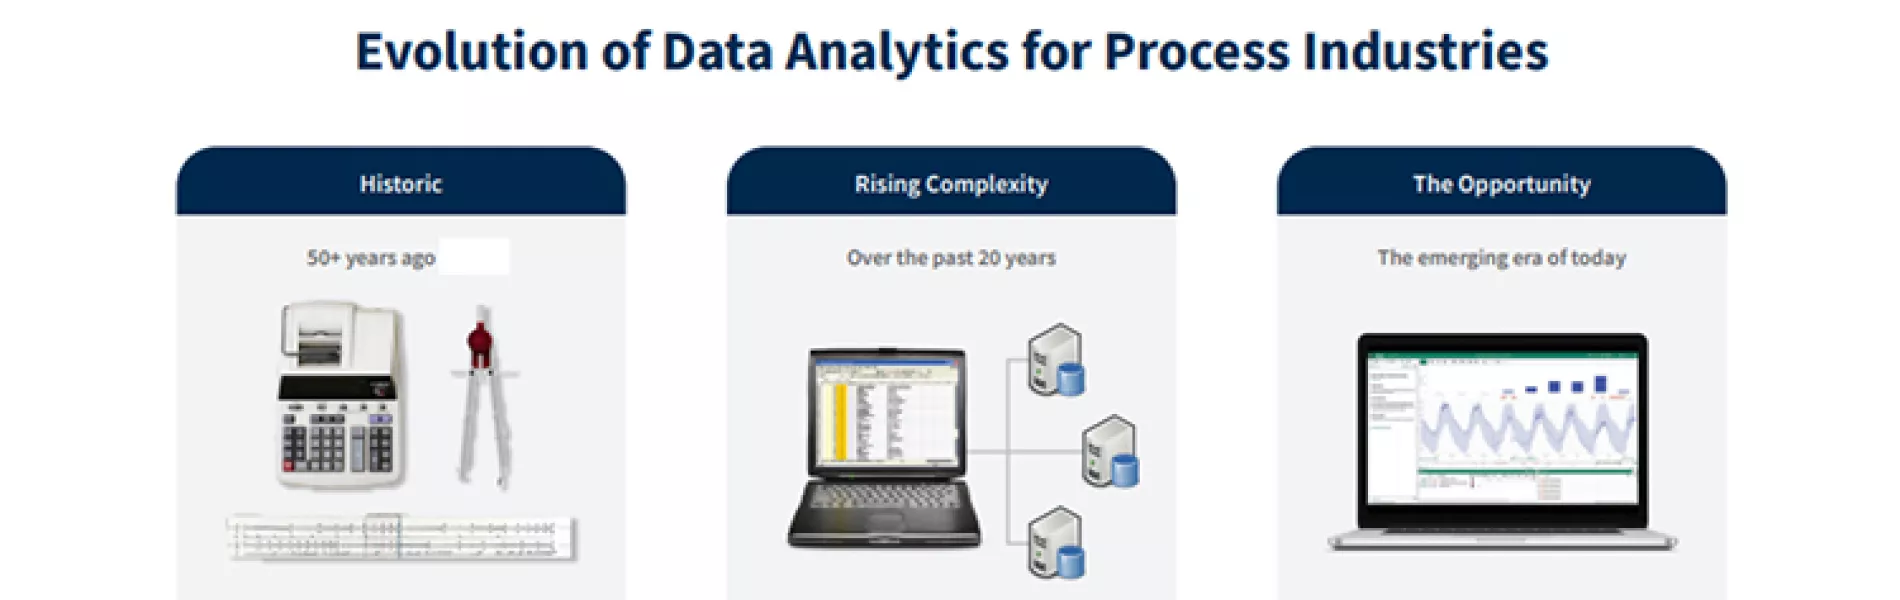 Evolution of Data Analytics for Process Industries